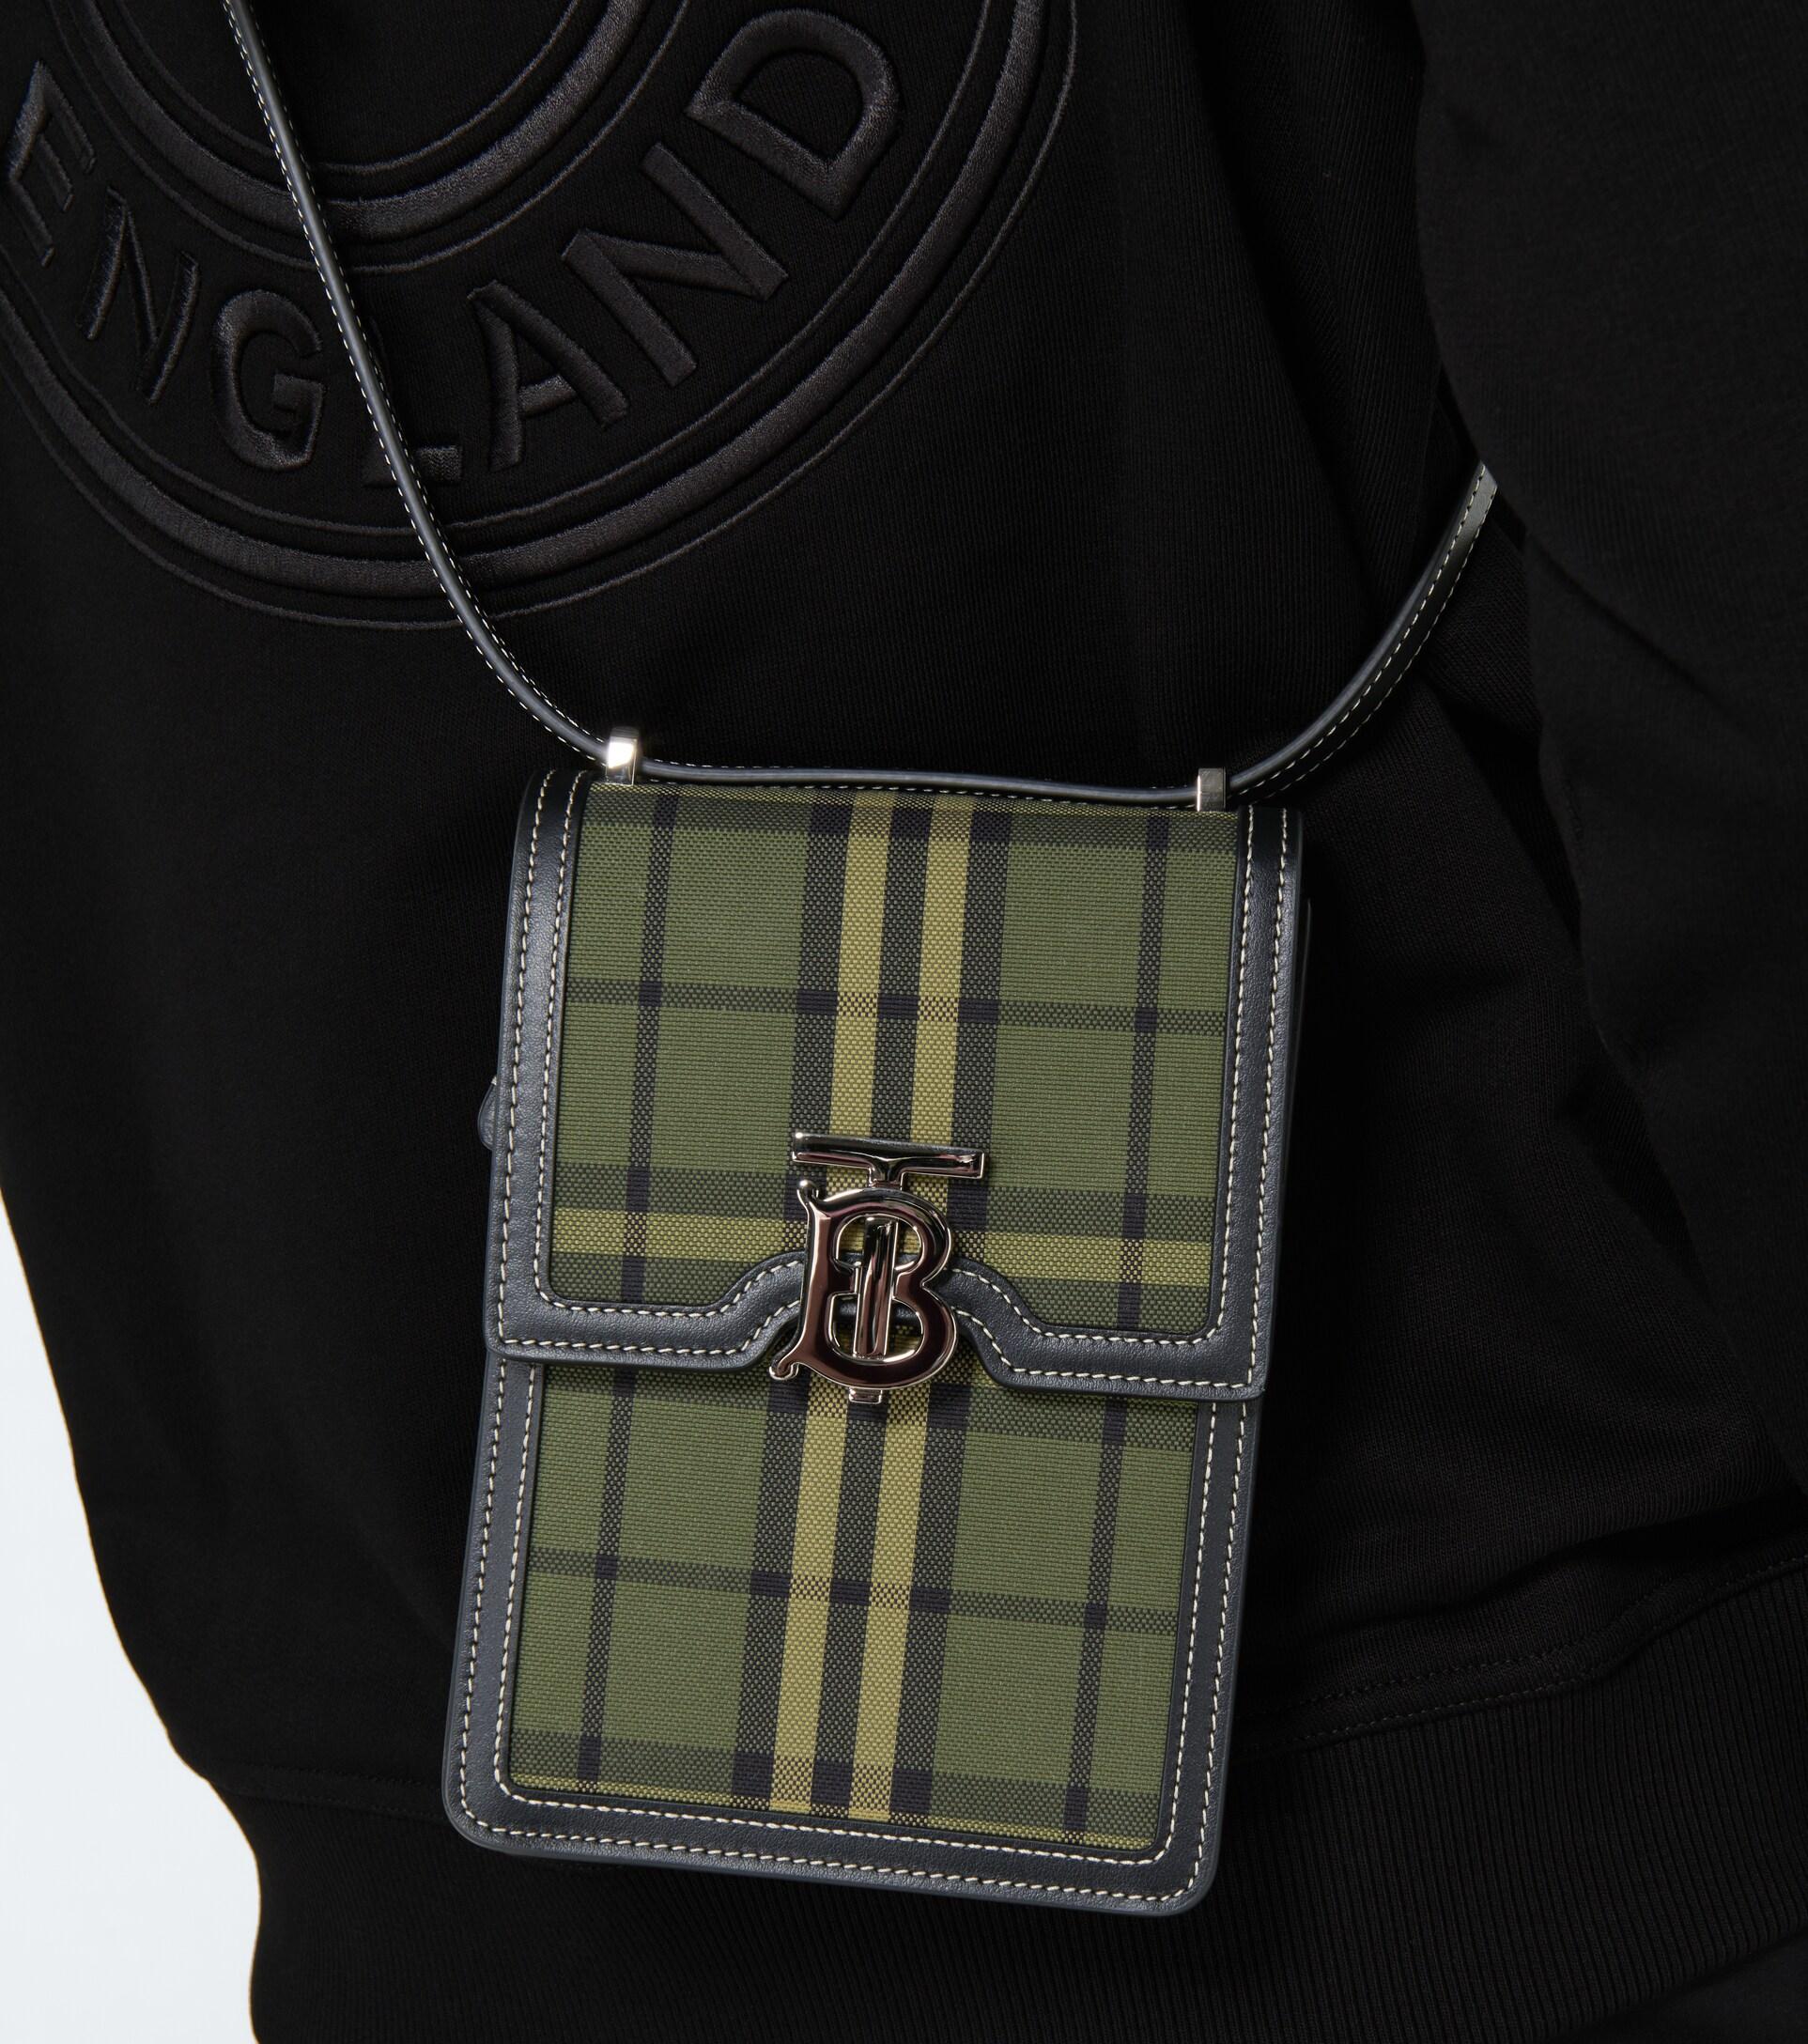 Monogram Leather Robin Bag in Black, Burberry® Official